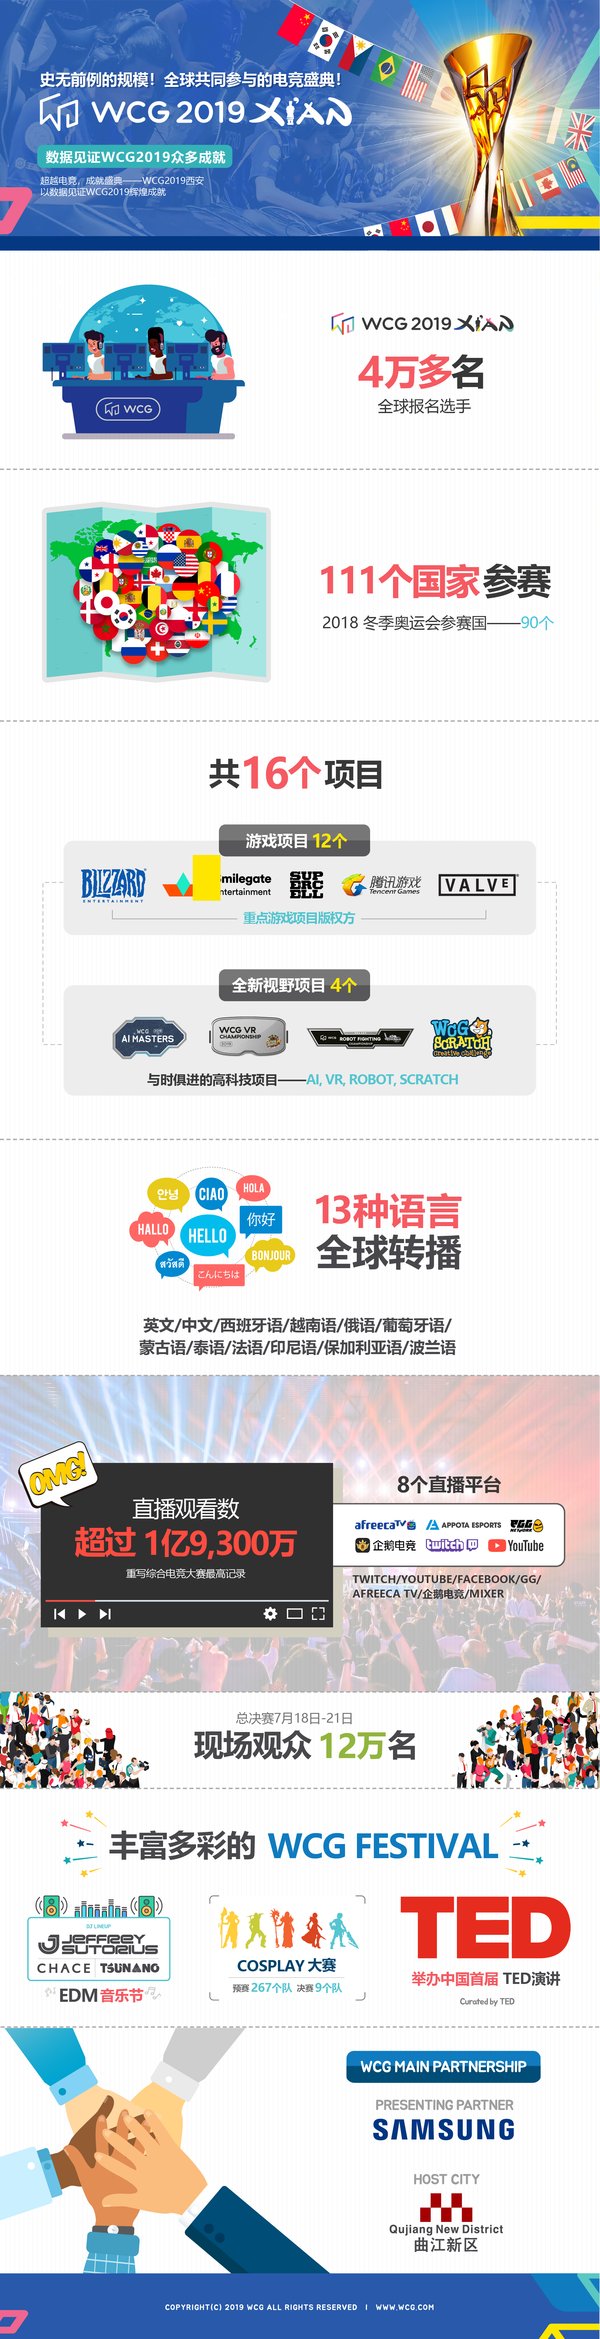 WCG 2019 Infographic